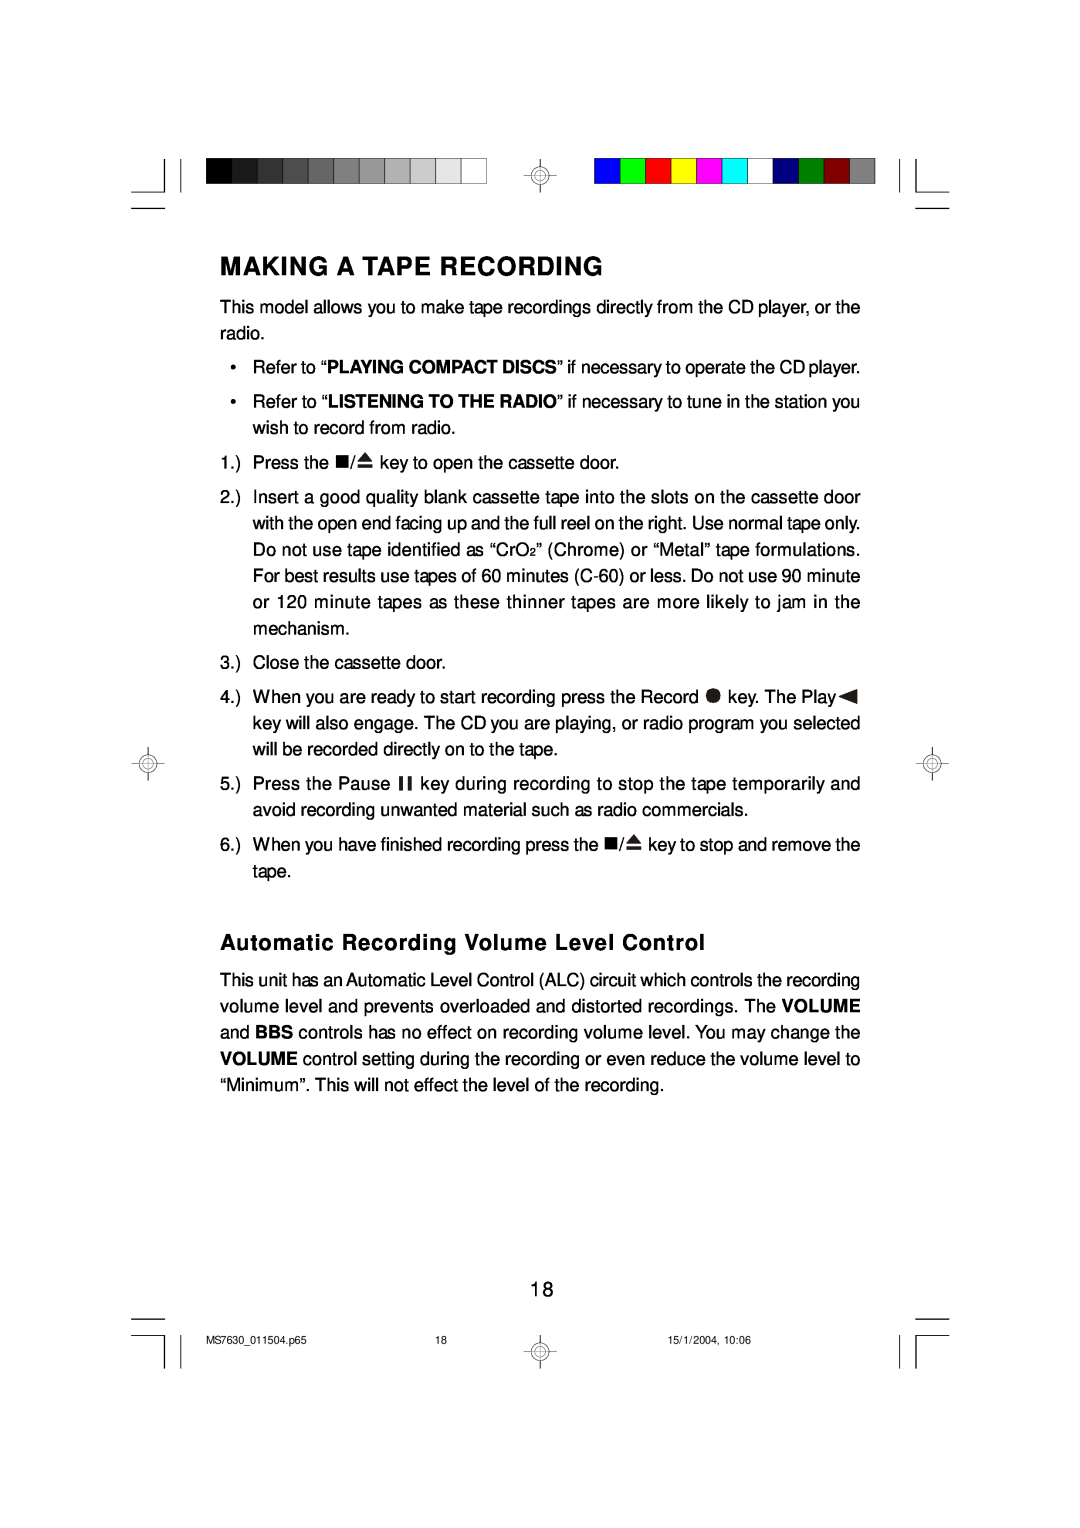 Emerson MS7630 owner manual Making A Tape Recording, Automatic Recording Volume Level Control 